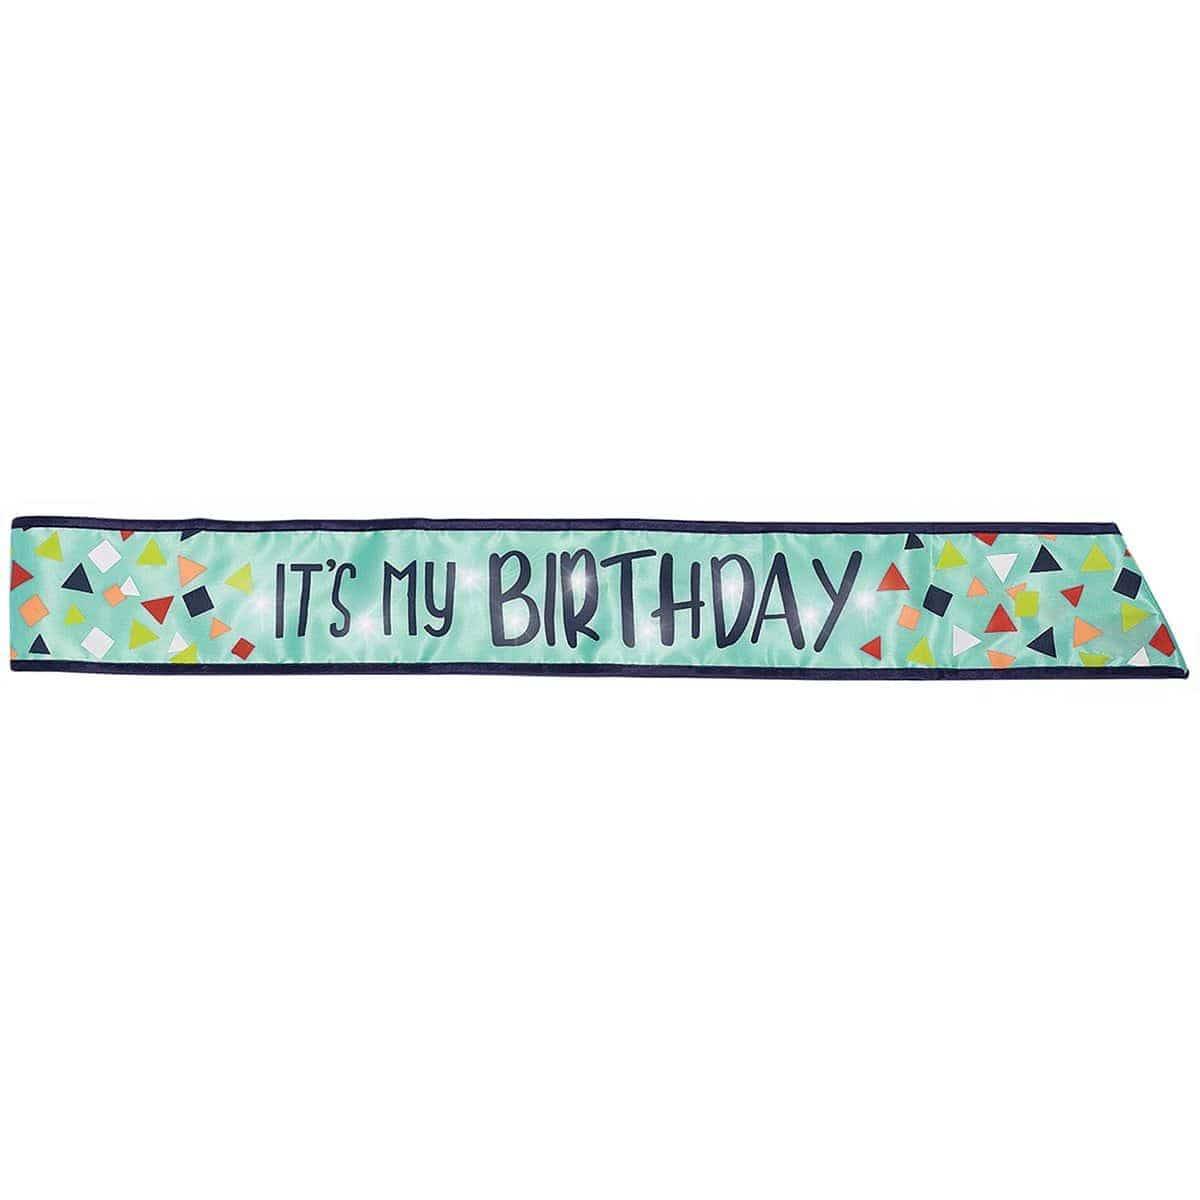 Buy General Birthday A Reason To Celebrate - Light-up Sash sold at Party Expert